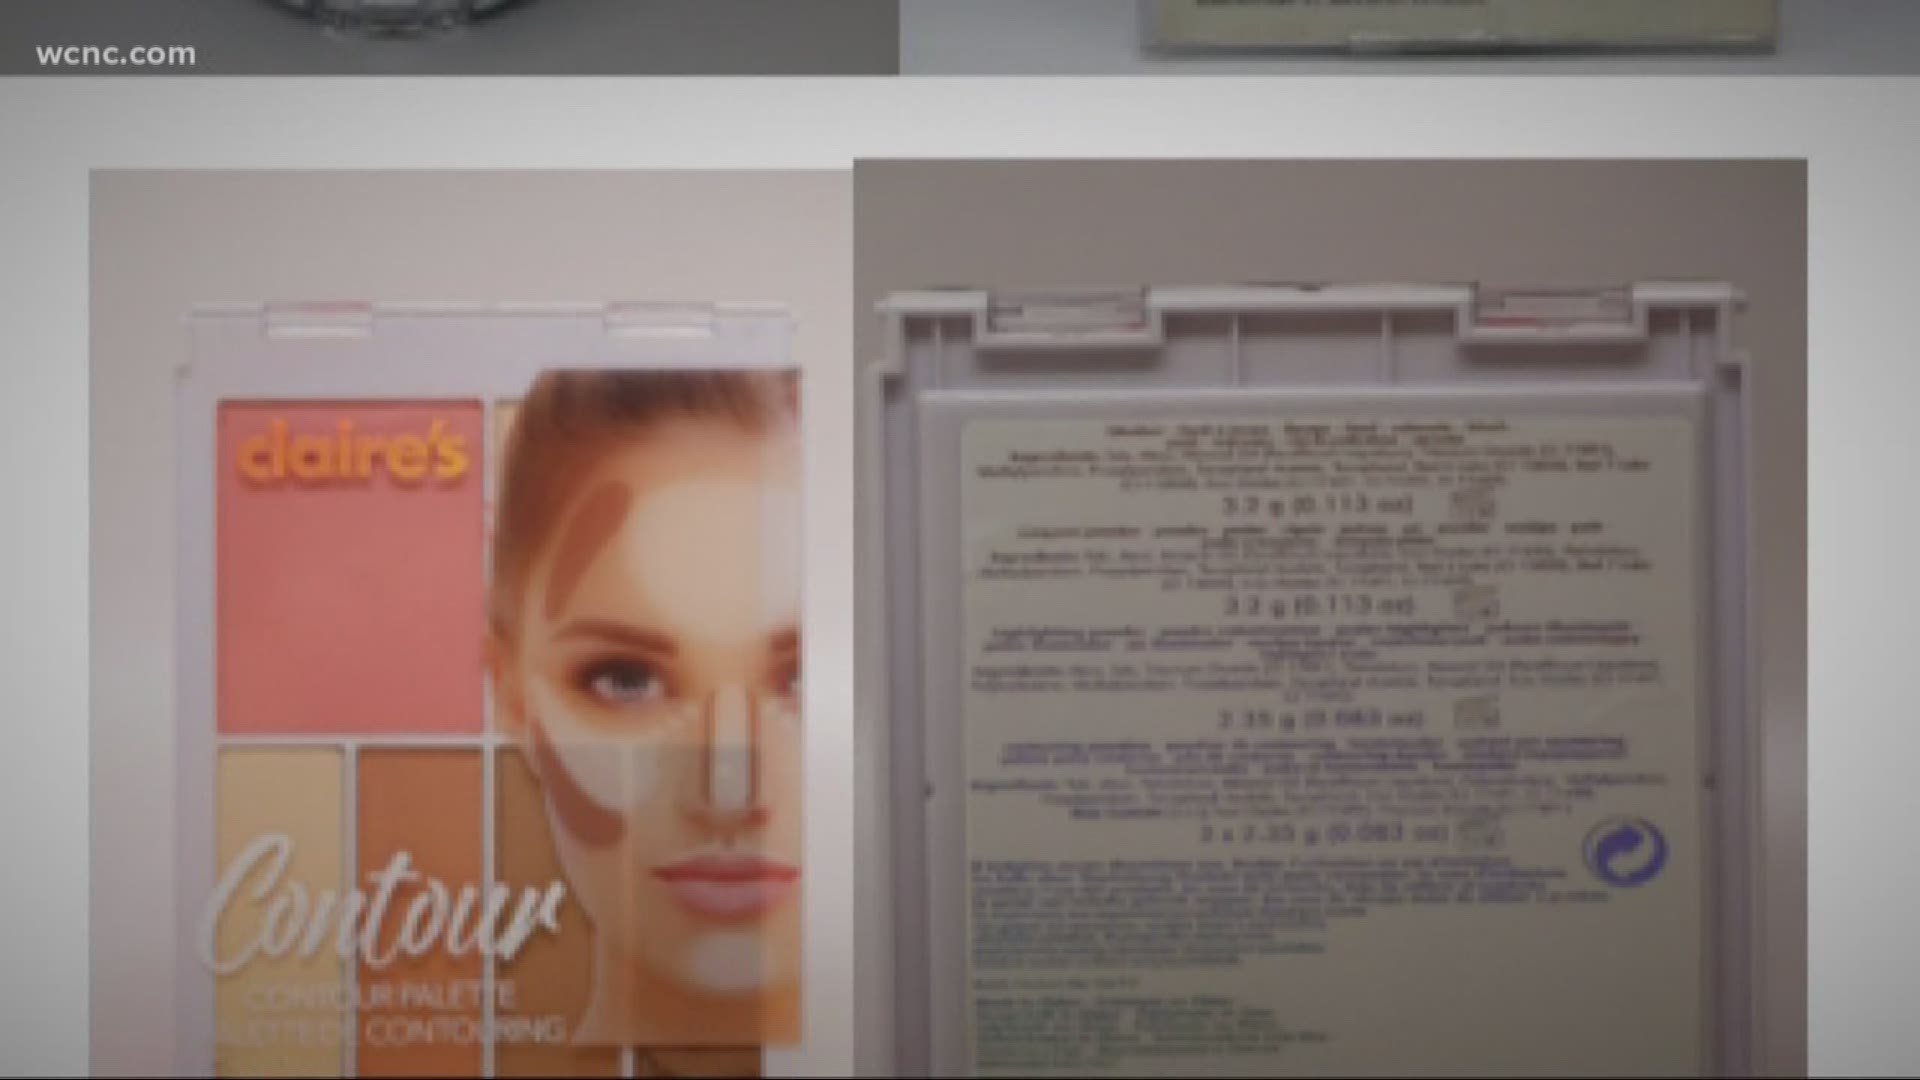 The FDA says they've uncovered "cancer causing asbestos" in several makeup products marketed for children. A testing lab in NC was the first to alert the agency. Now, these products are being recalled nationwide.